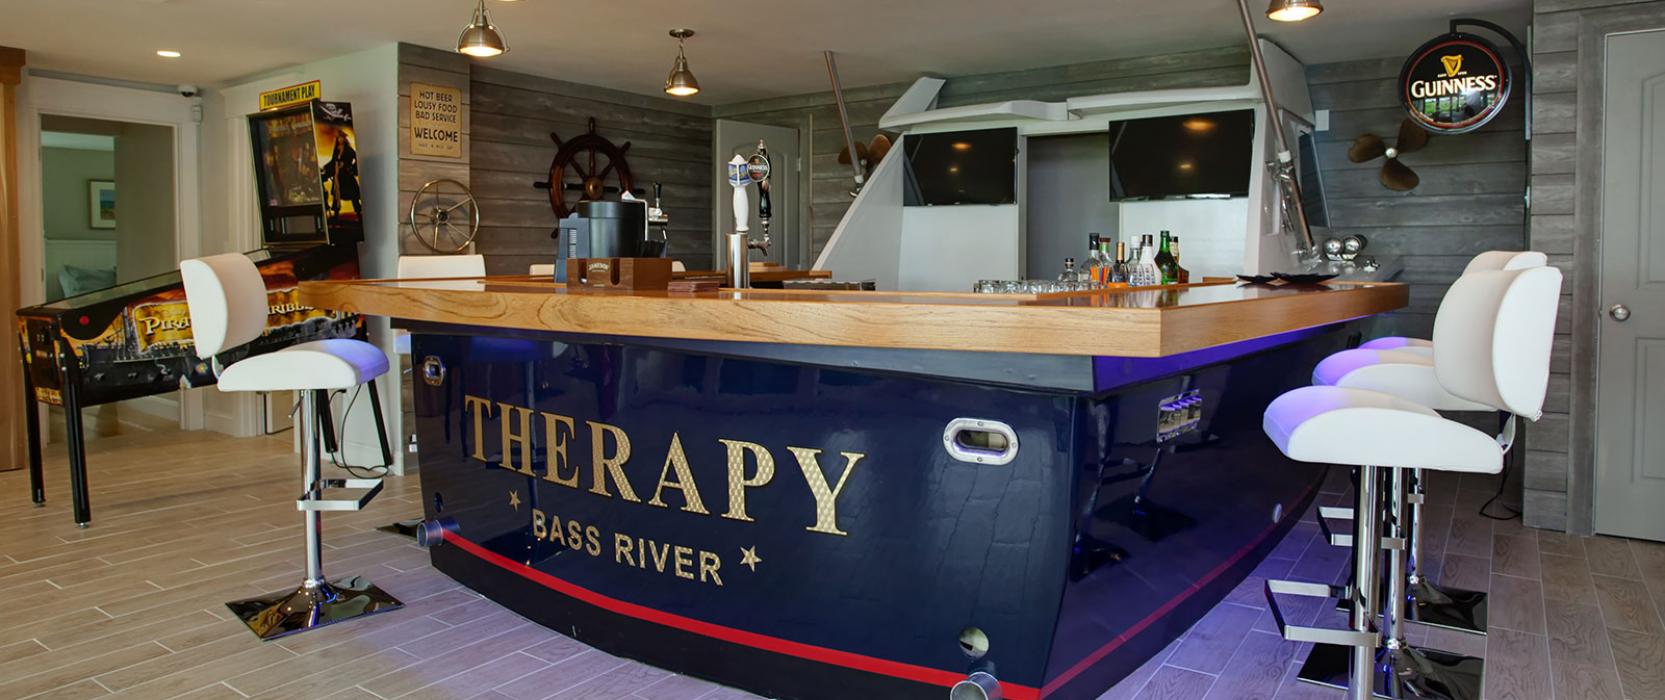 Real-life boat repurposed as a bar for a Cape Cod game room